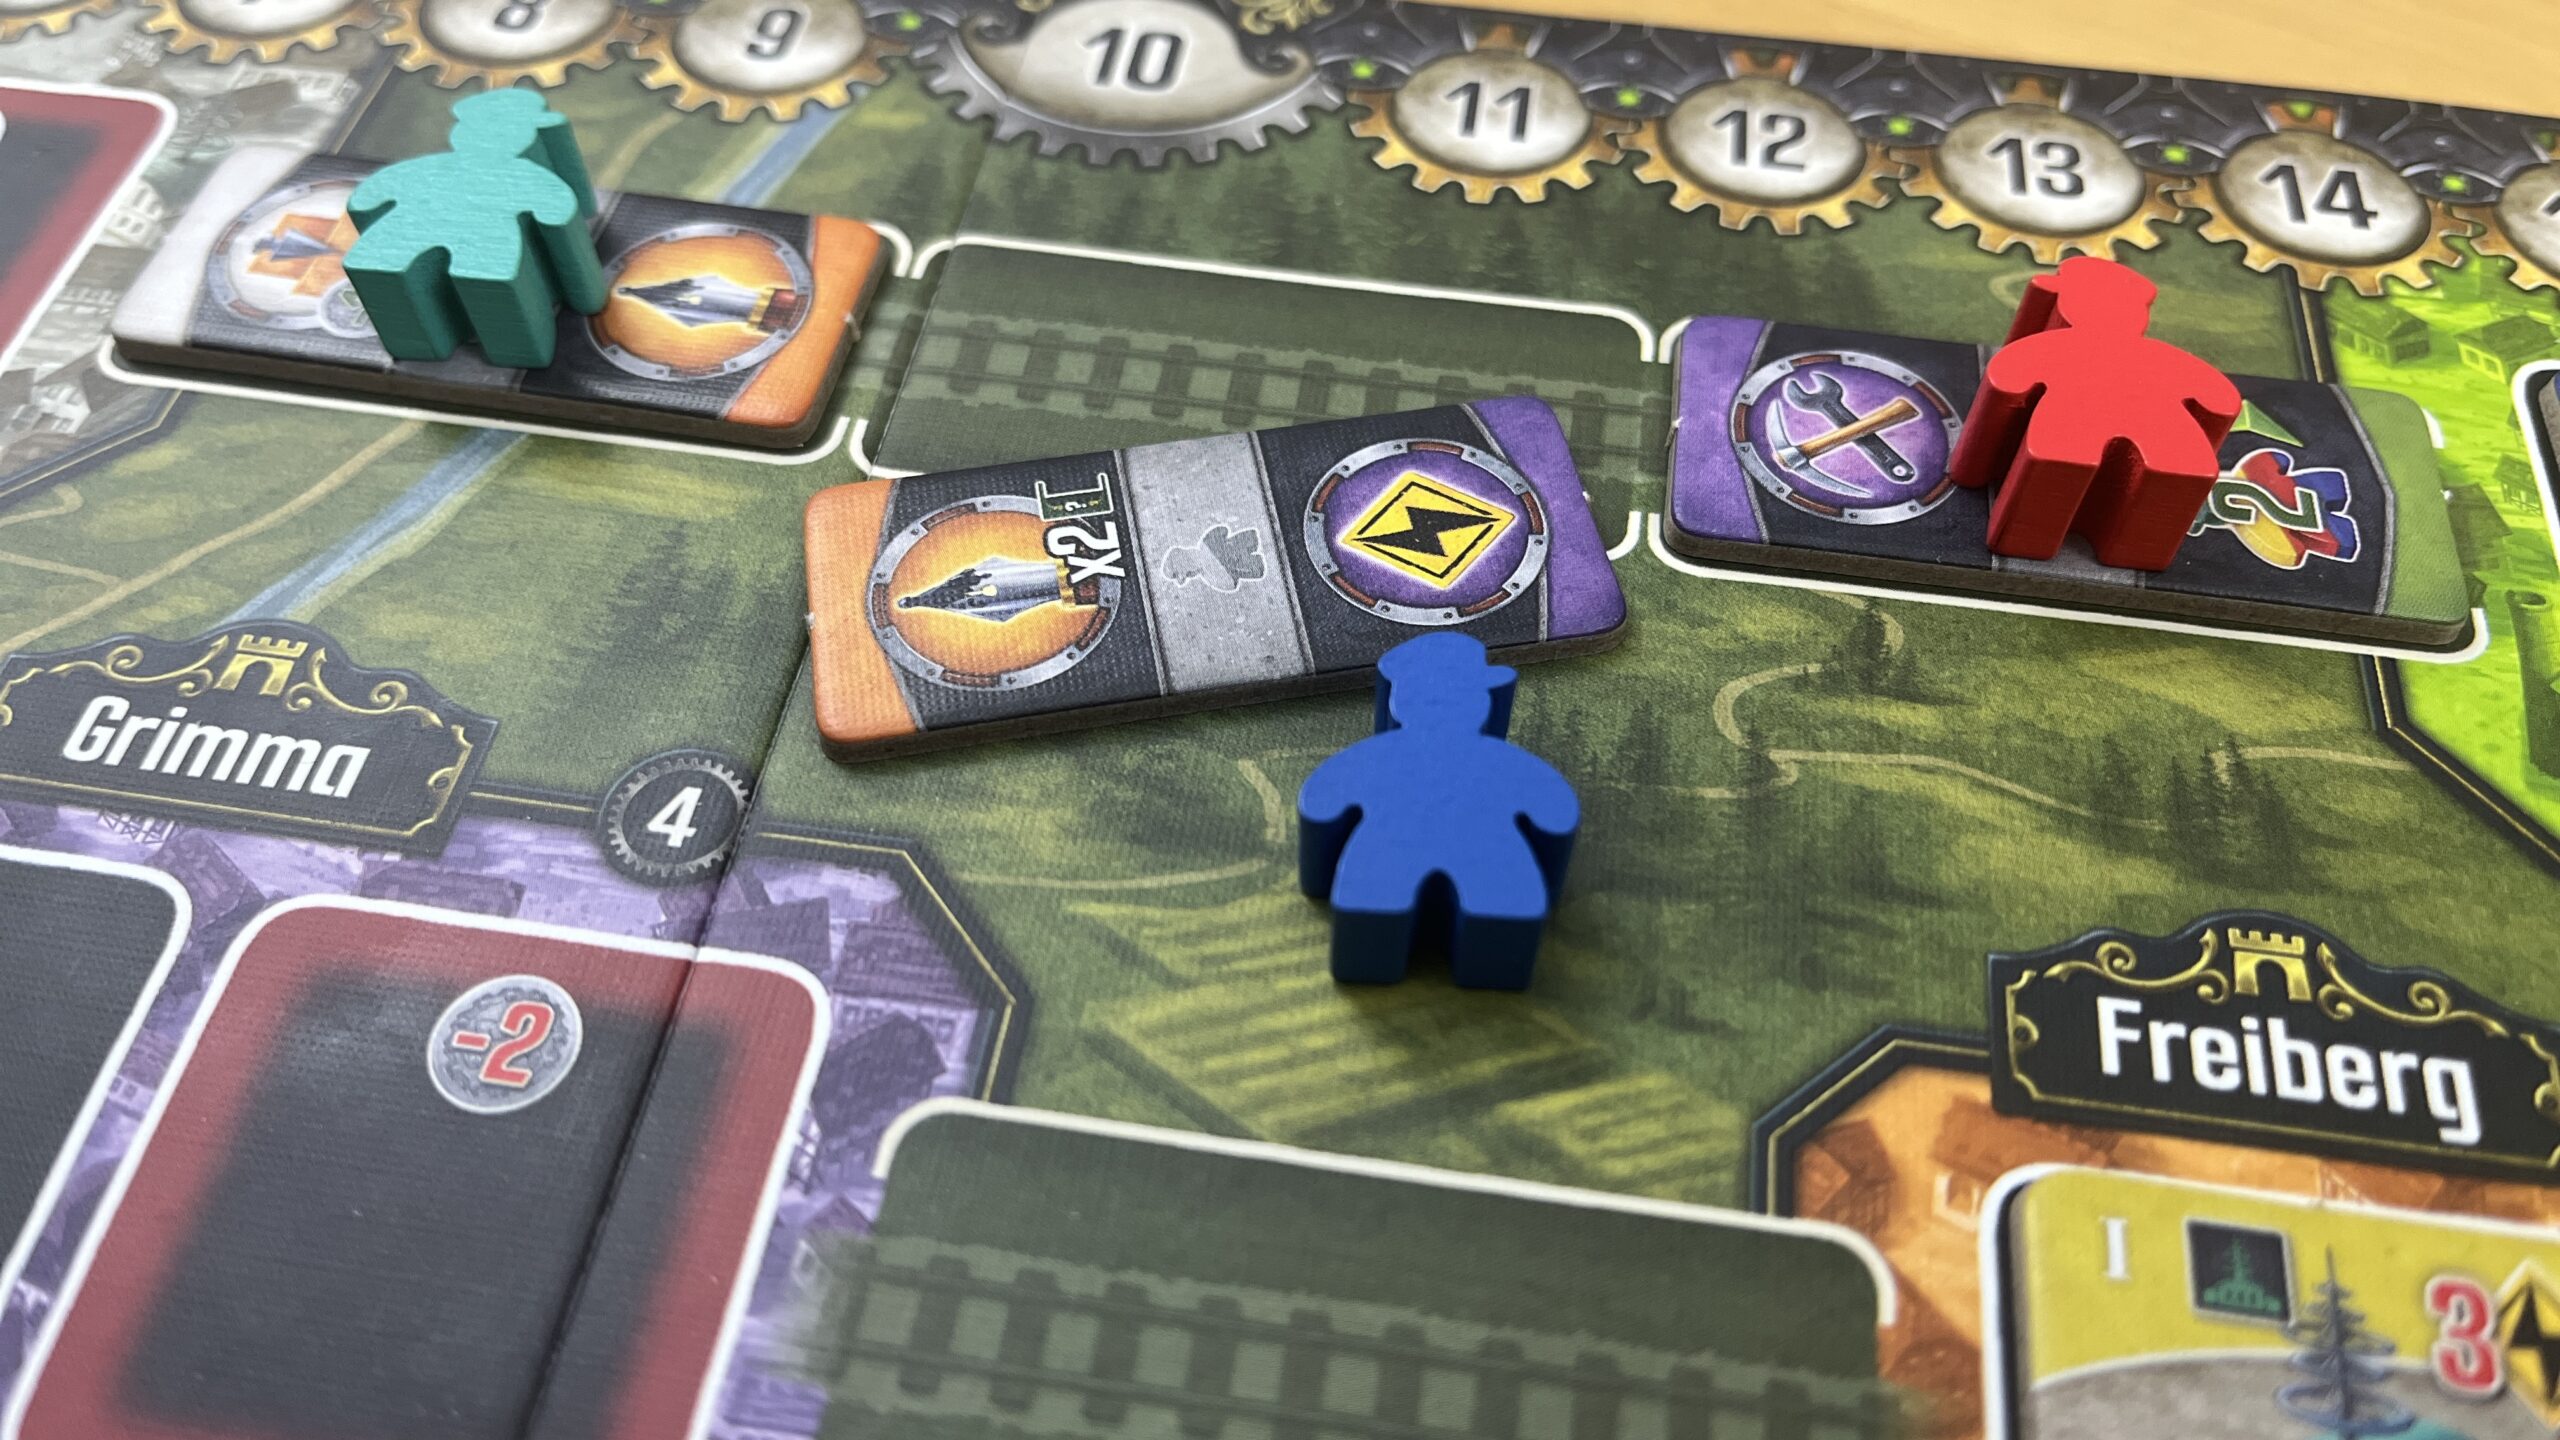 Nights Around a Table - Nucleum board game completing a railroad track